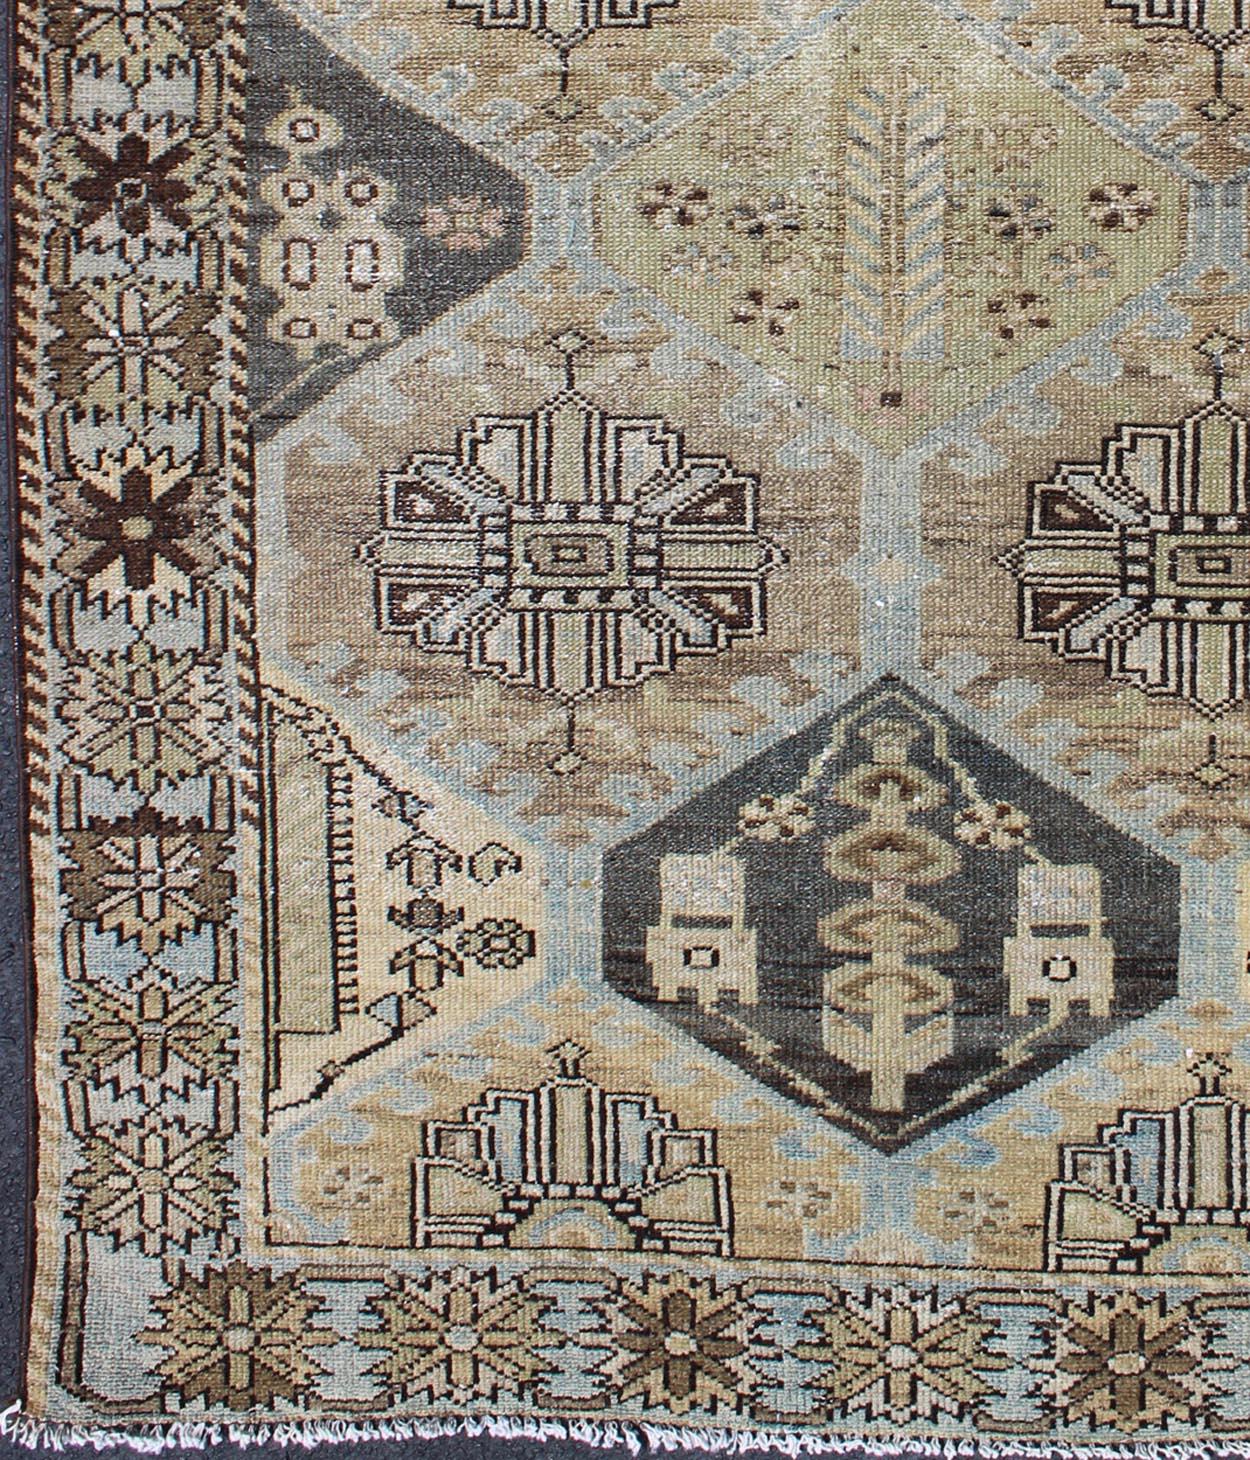 Persian Bakhtiari vintage rug with geometric design in gray, camel, tan, taupe, brown, rug gng-4745, country of origin / type: Iran / Bakhtiari, circa 1940s.

This vintage Persian Bakhtiari rug from mid-20th century Iran features an expansive